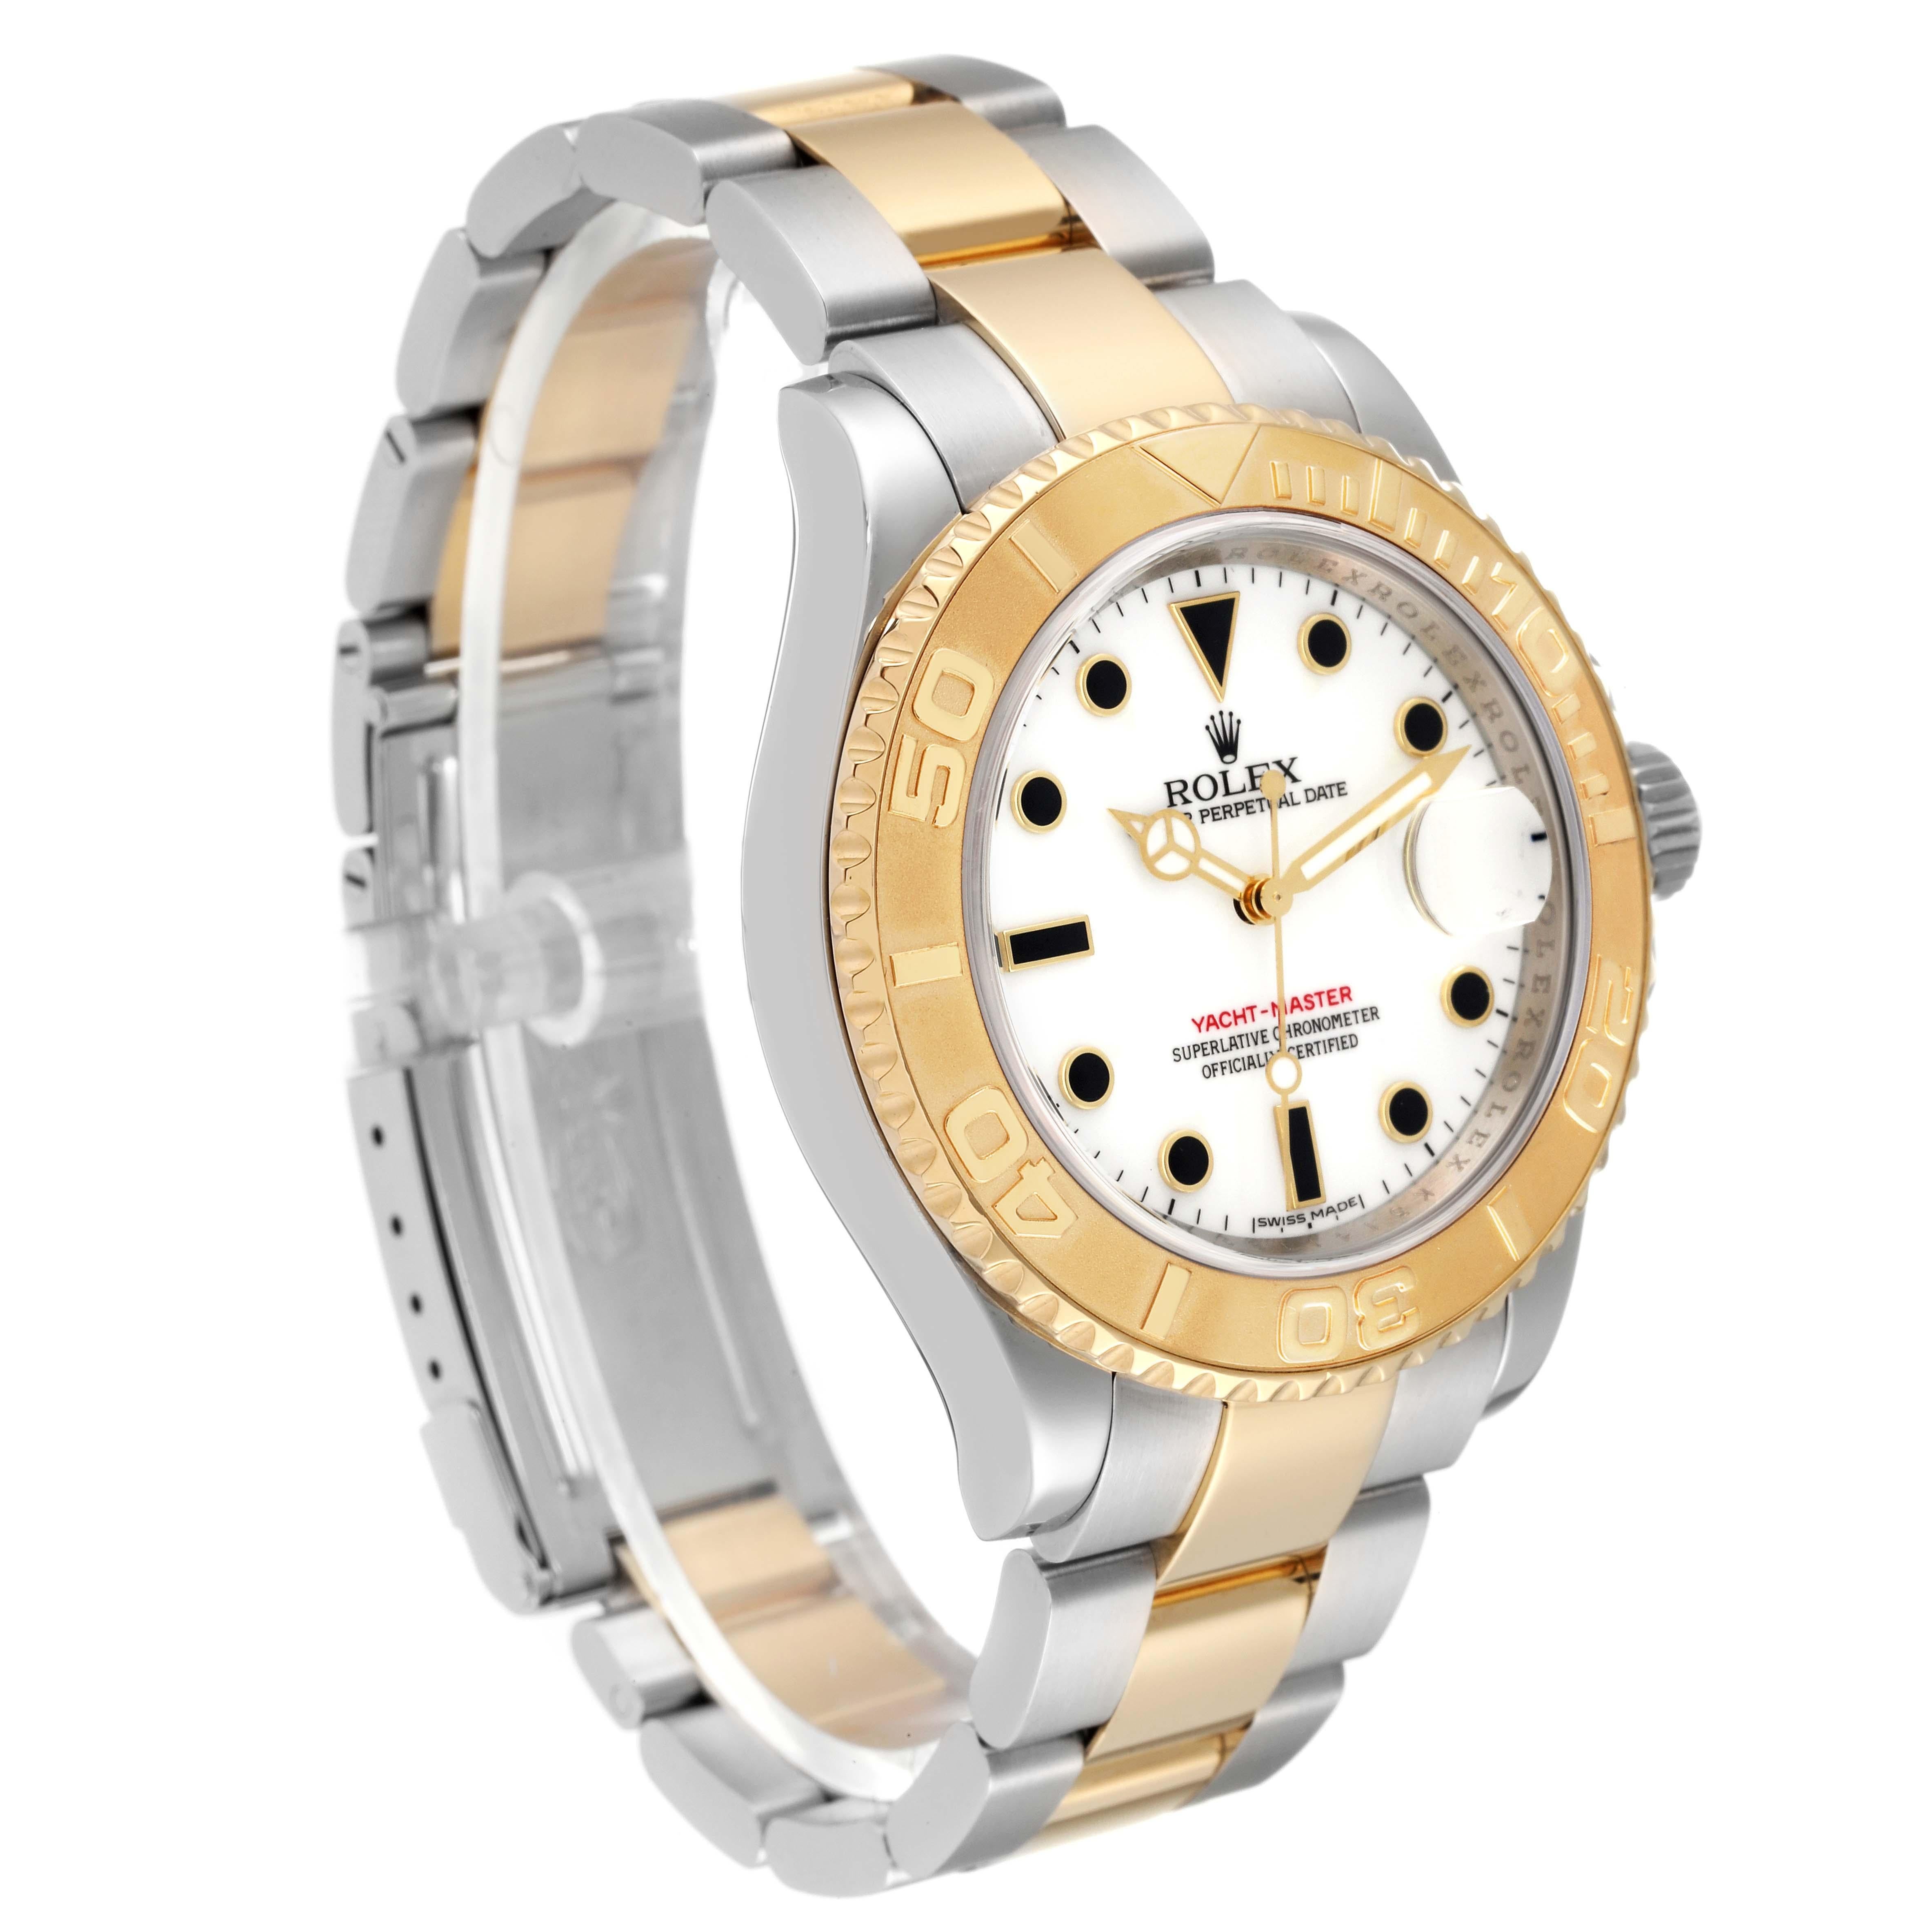 Men's Rolex Yachtmaster Steel Yellow Gold White Dial Mens Watch 16623 Box Card